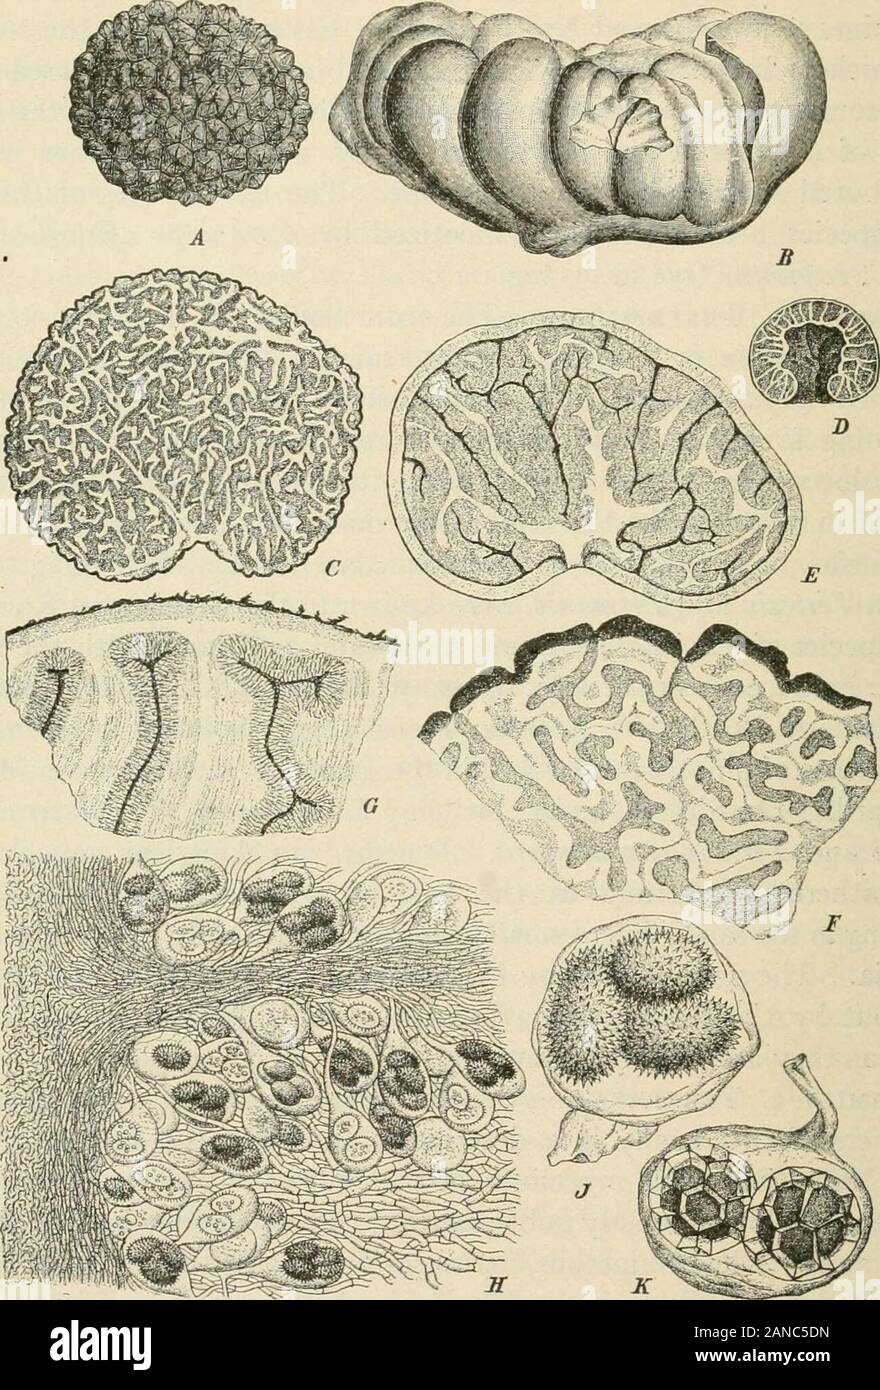 A text-book of mycology and plant pathology . e of Artemisia herba-alba foundgrowing in the sandy soil of small oueds, or stream beds, in southwesternAlgeria. They are located by the breaking of the soil surface and aredug out by the Arabs with a pointed stick. They form a valuablefood, as they are rich in protem. Family 5. Tiiberace^.—General reference has been made to themembers of this family in a description of the special ecology of theEUMYCETES. The mycelium of the trufifles is well developed andseptate, producing mostly subterranean, tuber-like fruit bodies, whichhave more or less numer Stock Photo